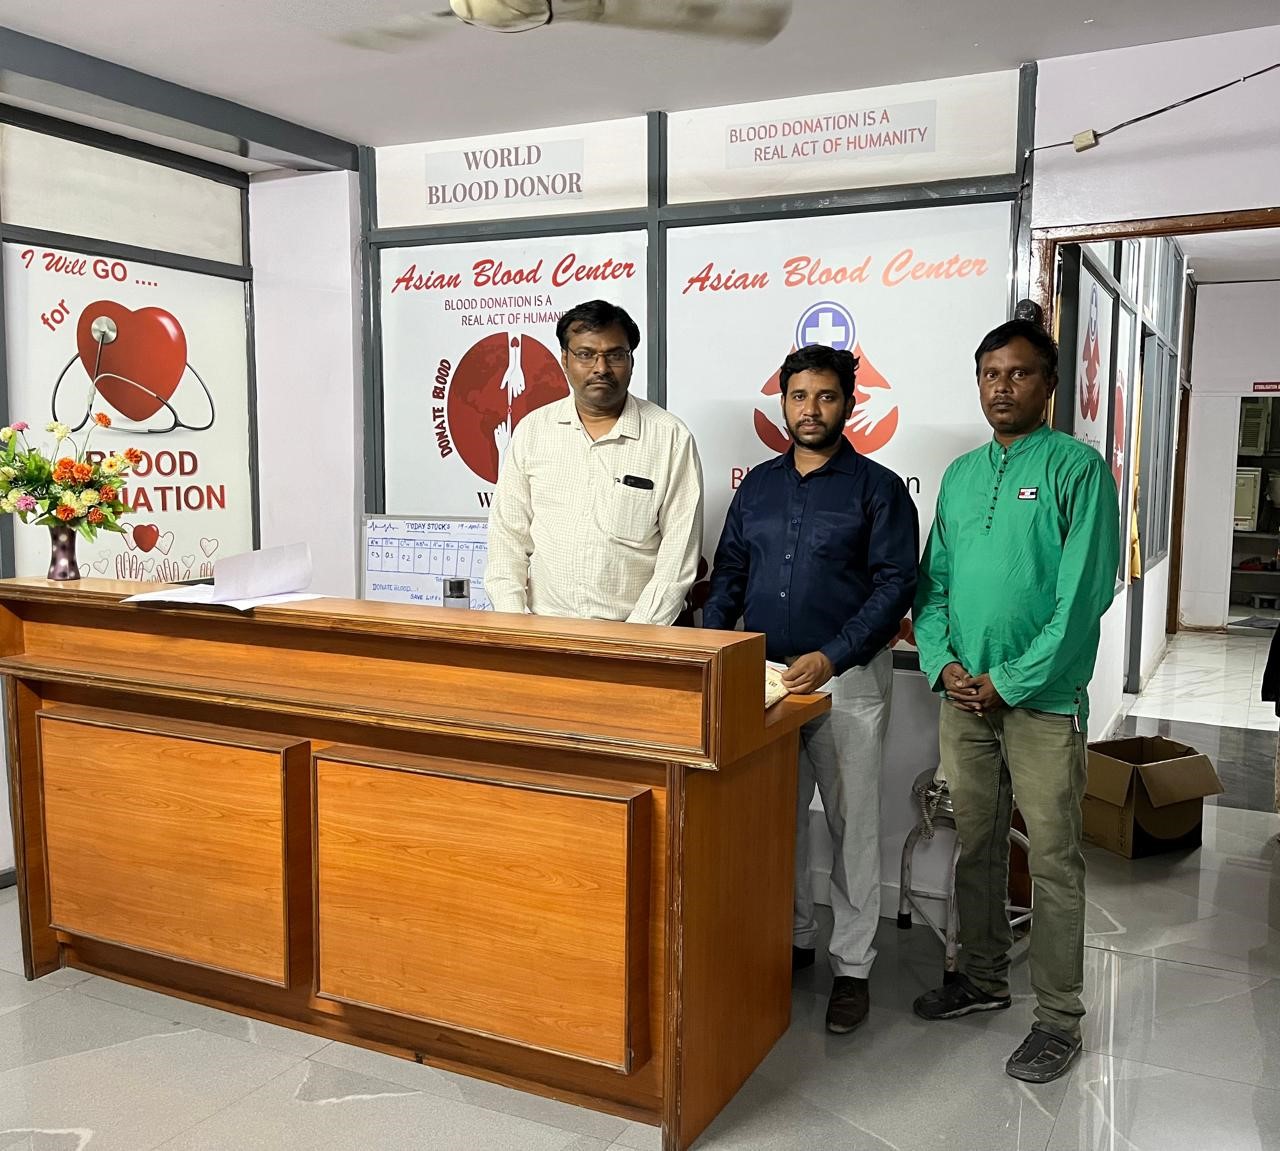 Telangana: Asian Blood Center booked for illegal processing, sale of Blood Components